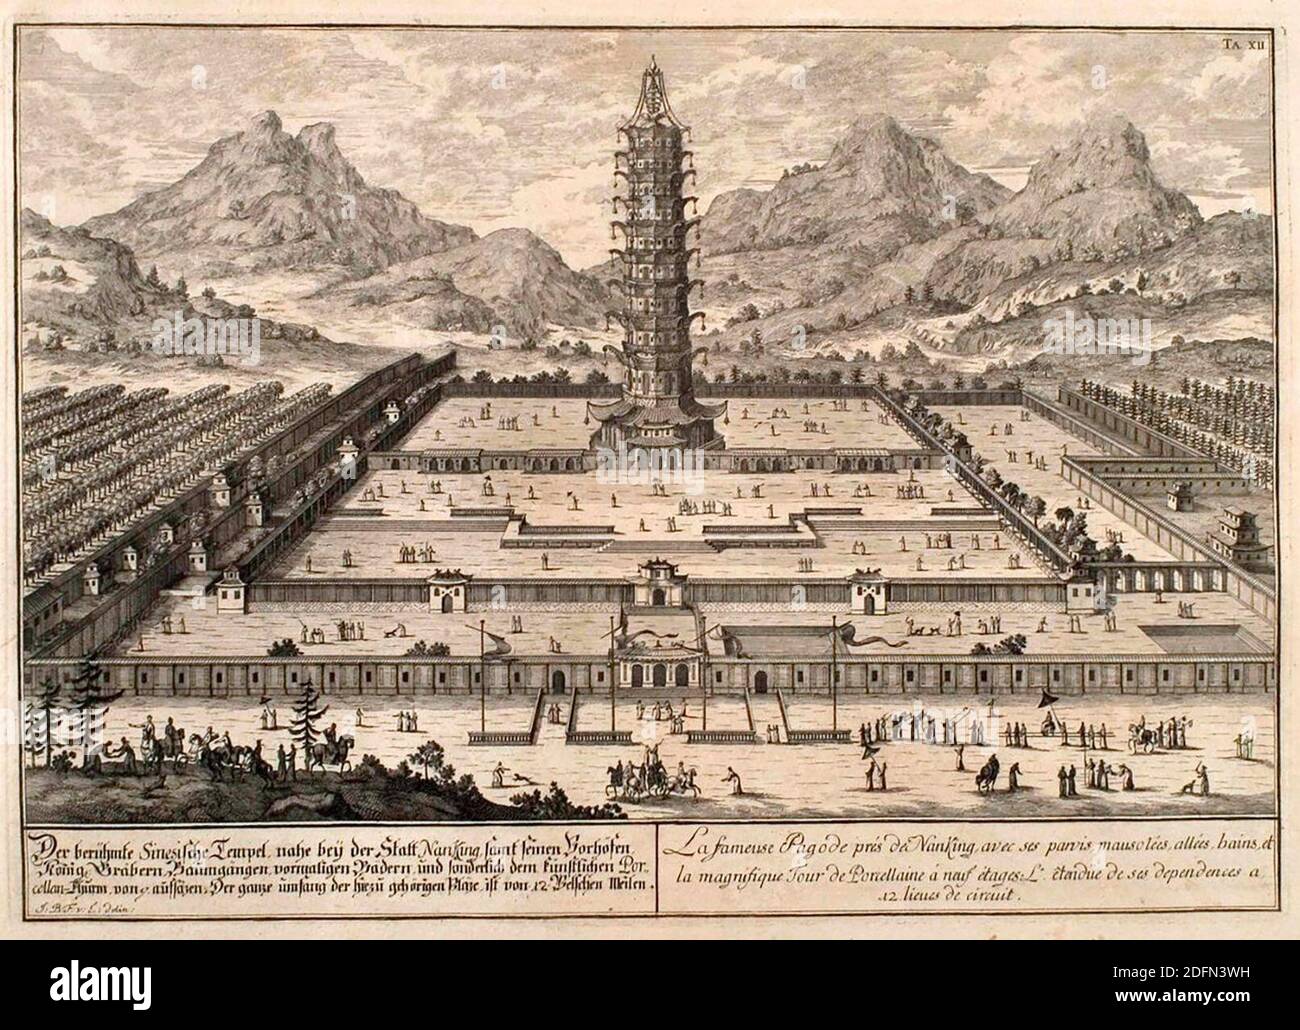 An illustration of the Porcelain Tower of Nanjing Stock Photo